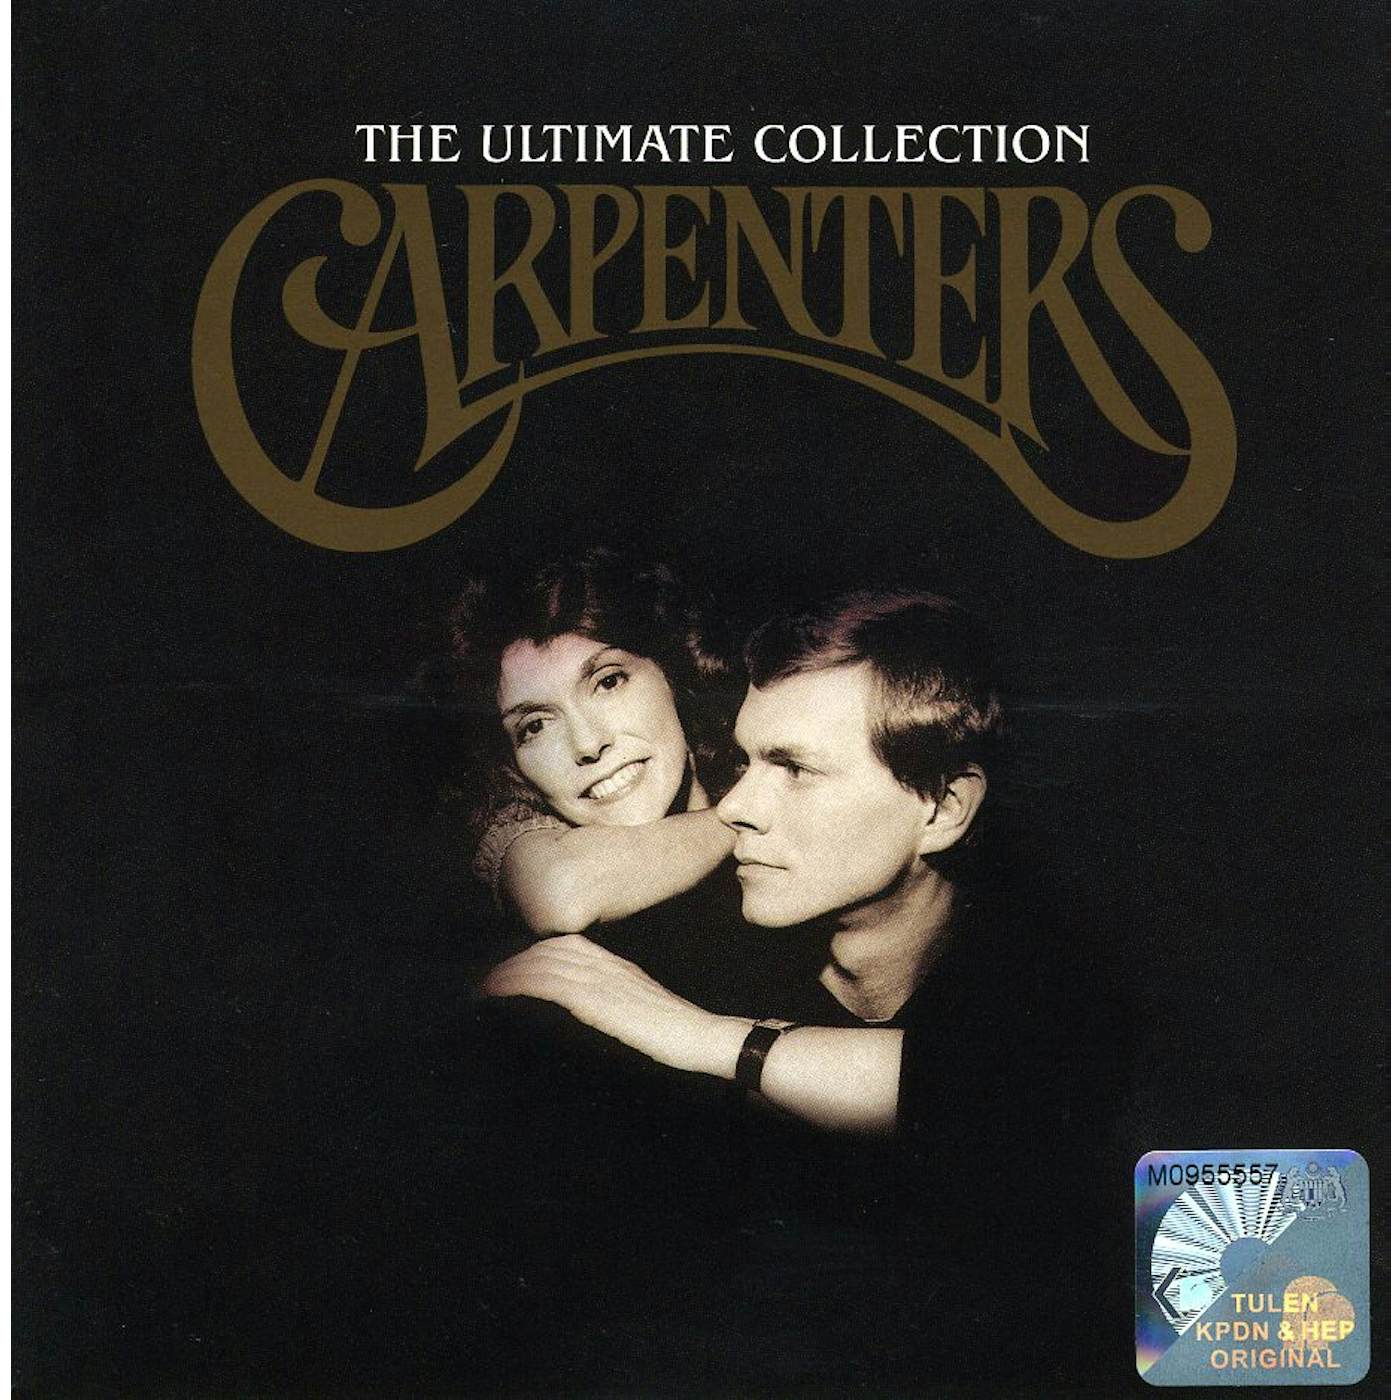 Carpenters ULTIMATE COLLECTION CD